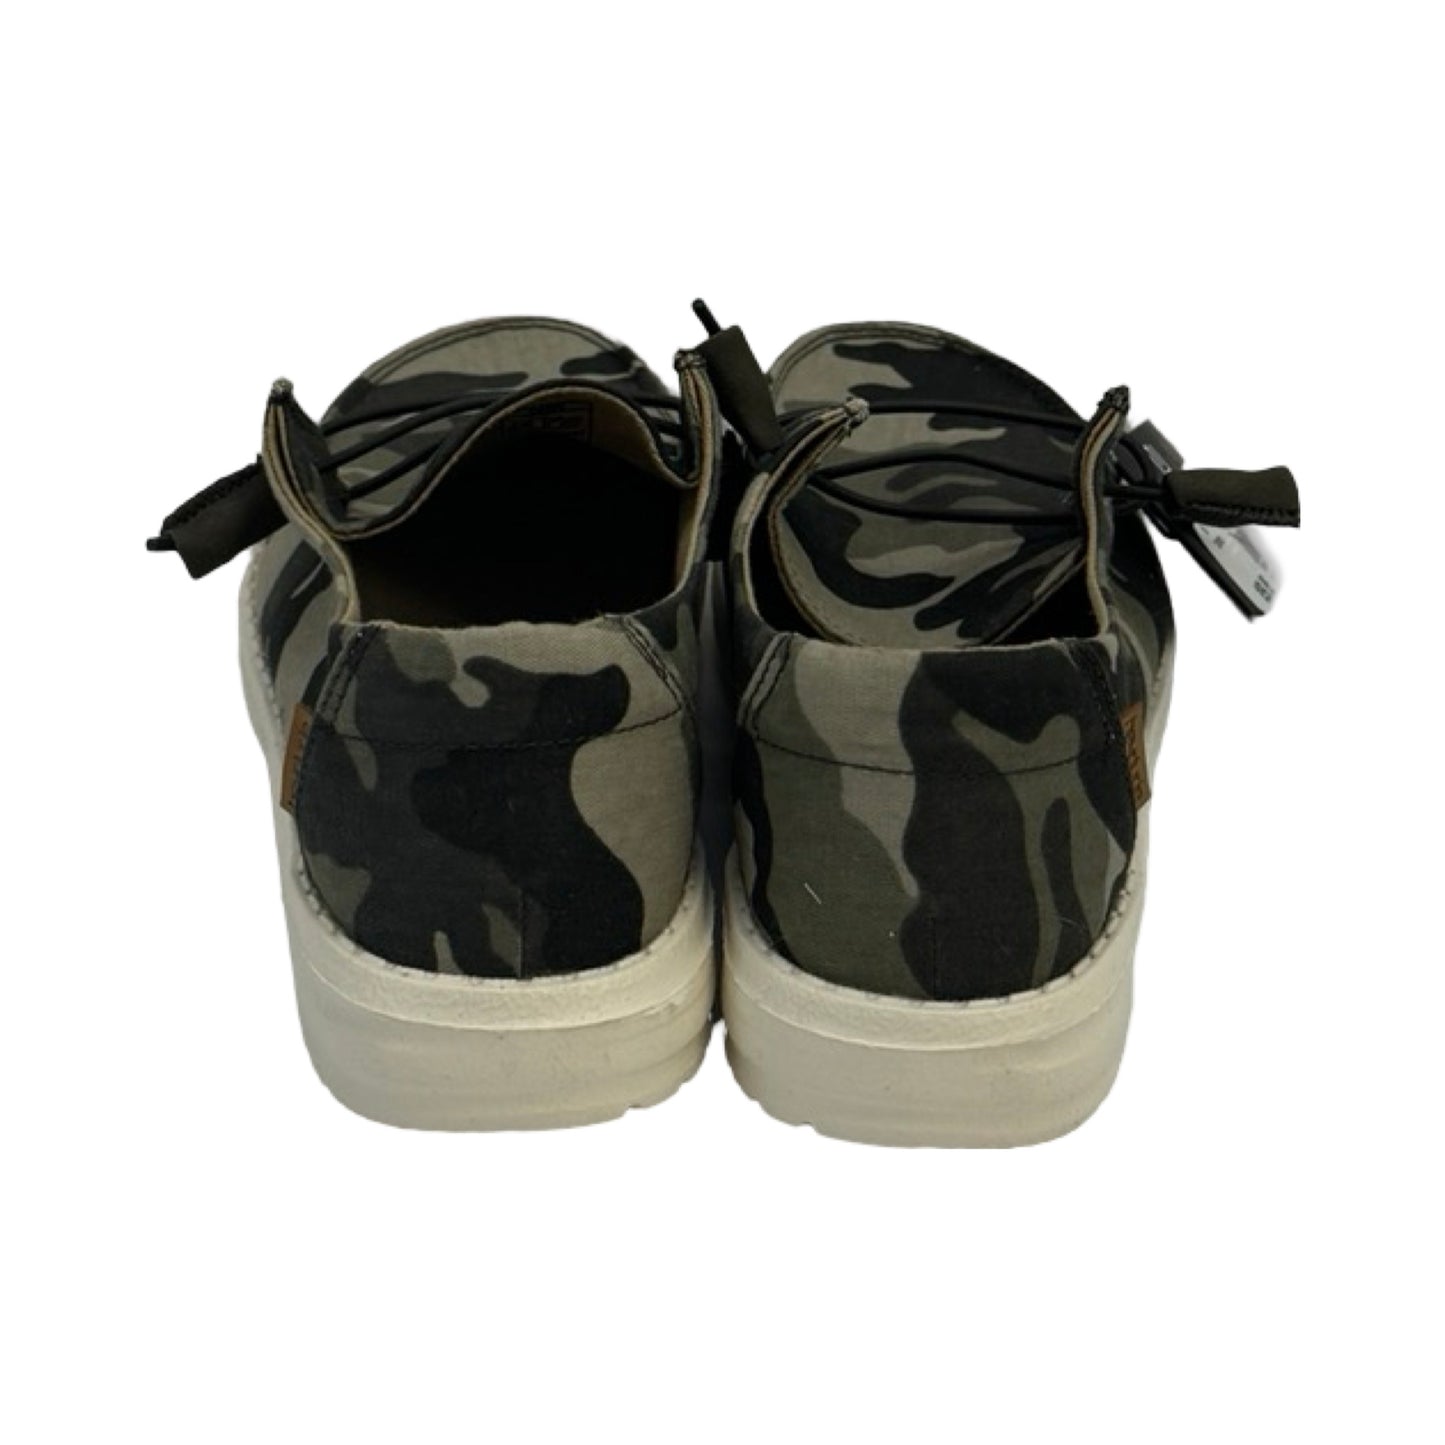 Shoes Sneakers By Hey Dude  Size: 6